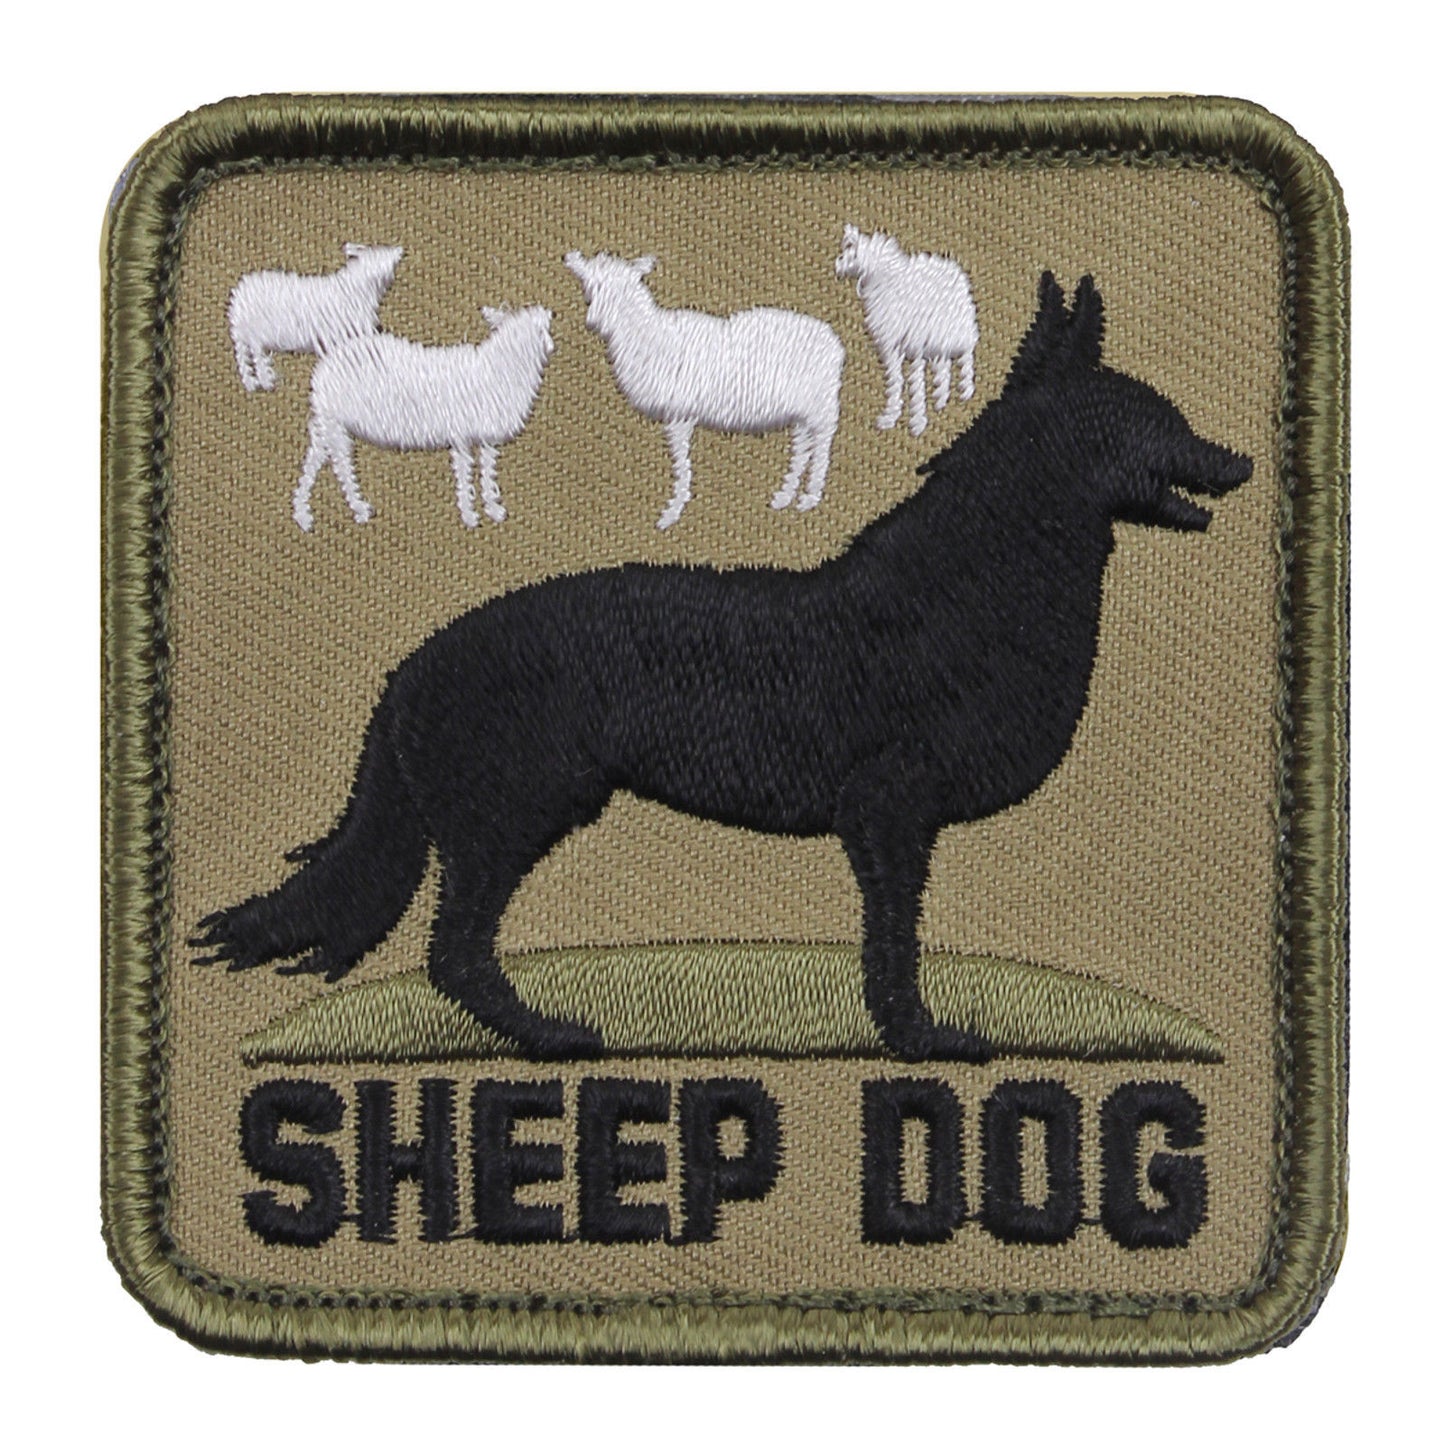 Rothco Sheep Dog Morale Patch - 2½" x 2½" Square Hook & Loop  Patch